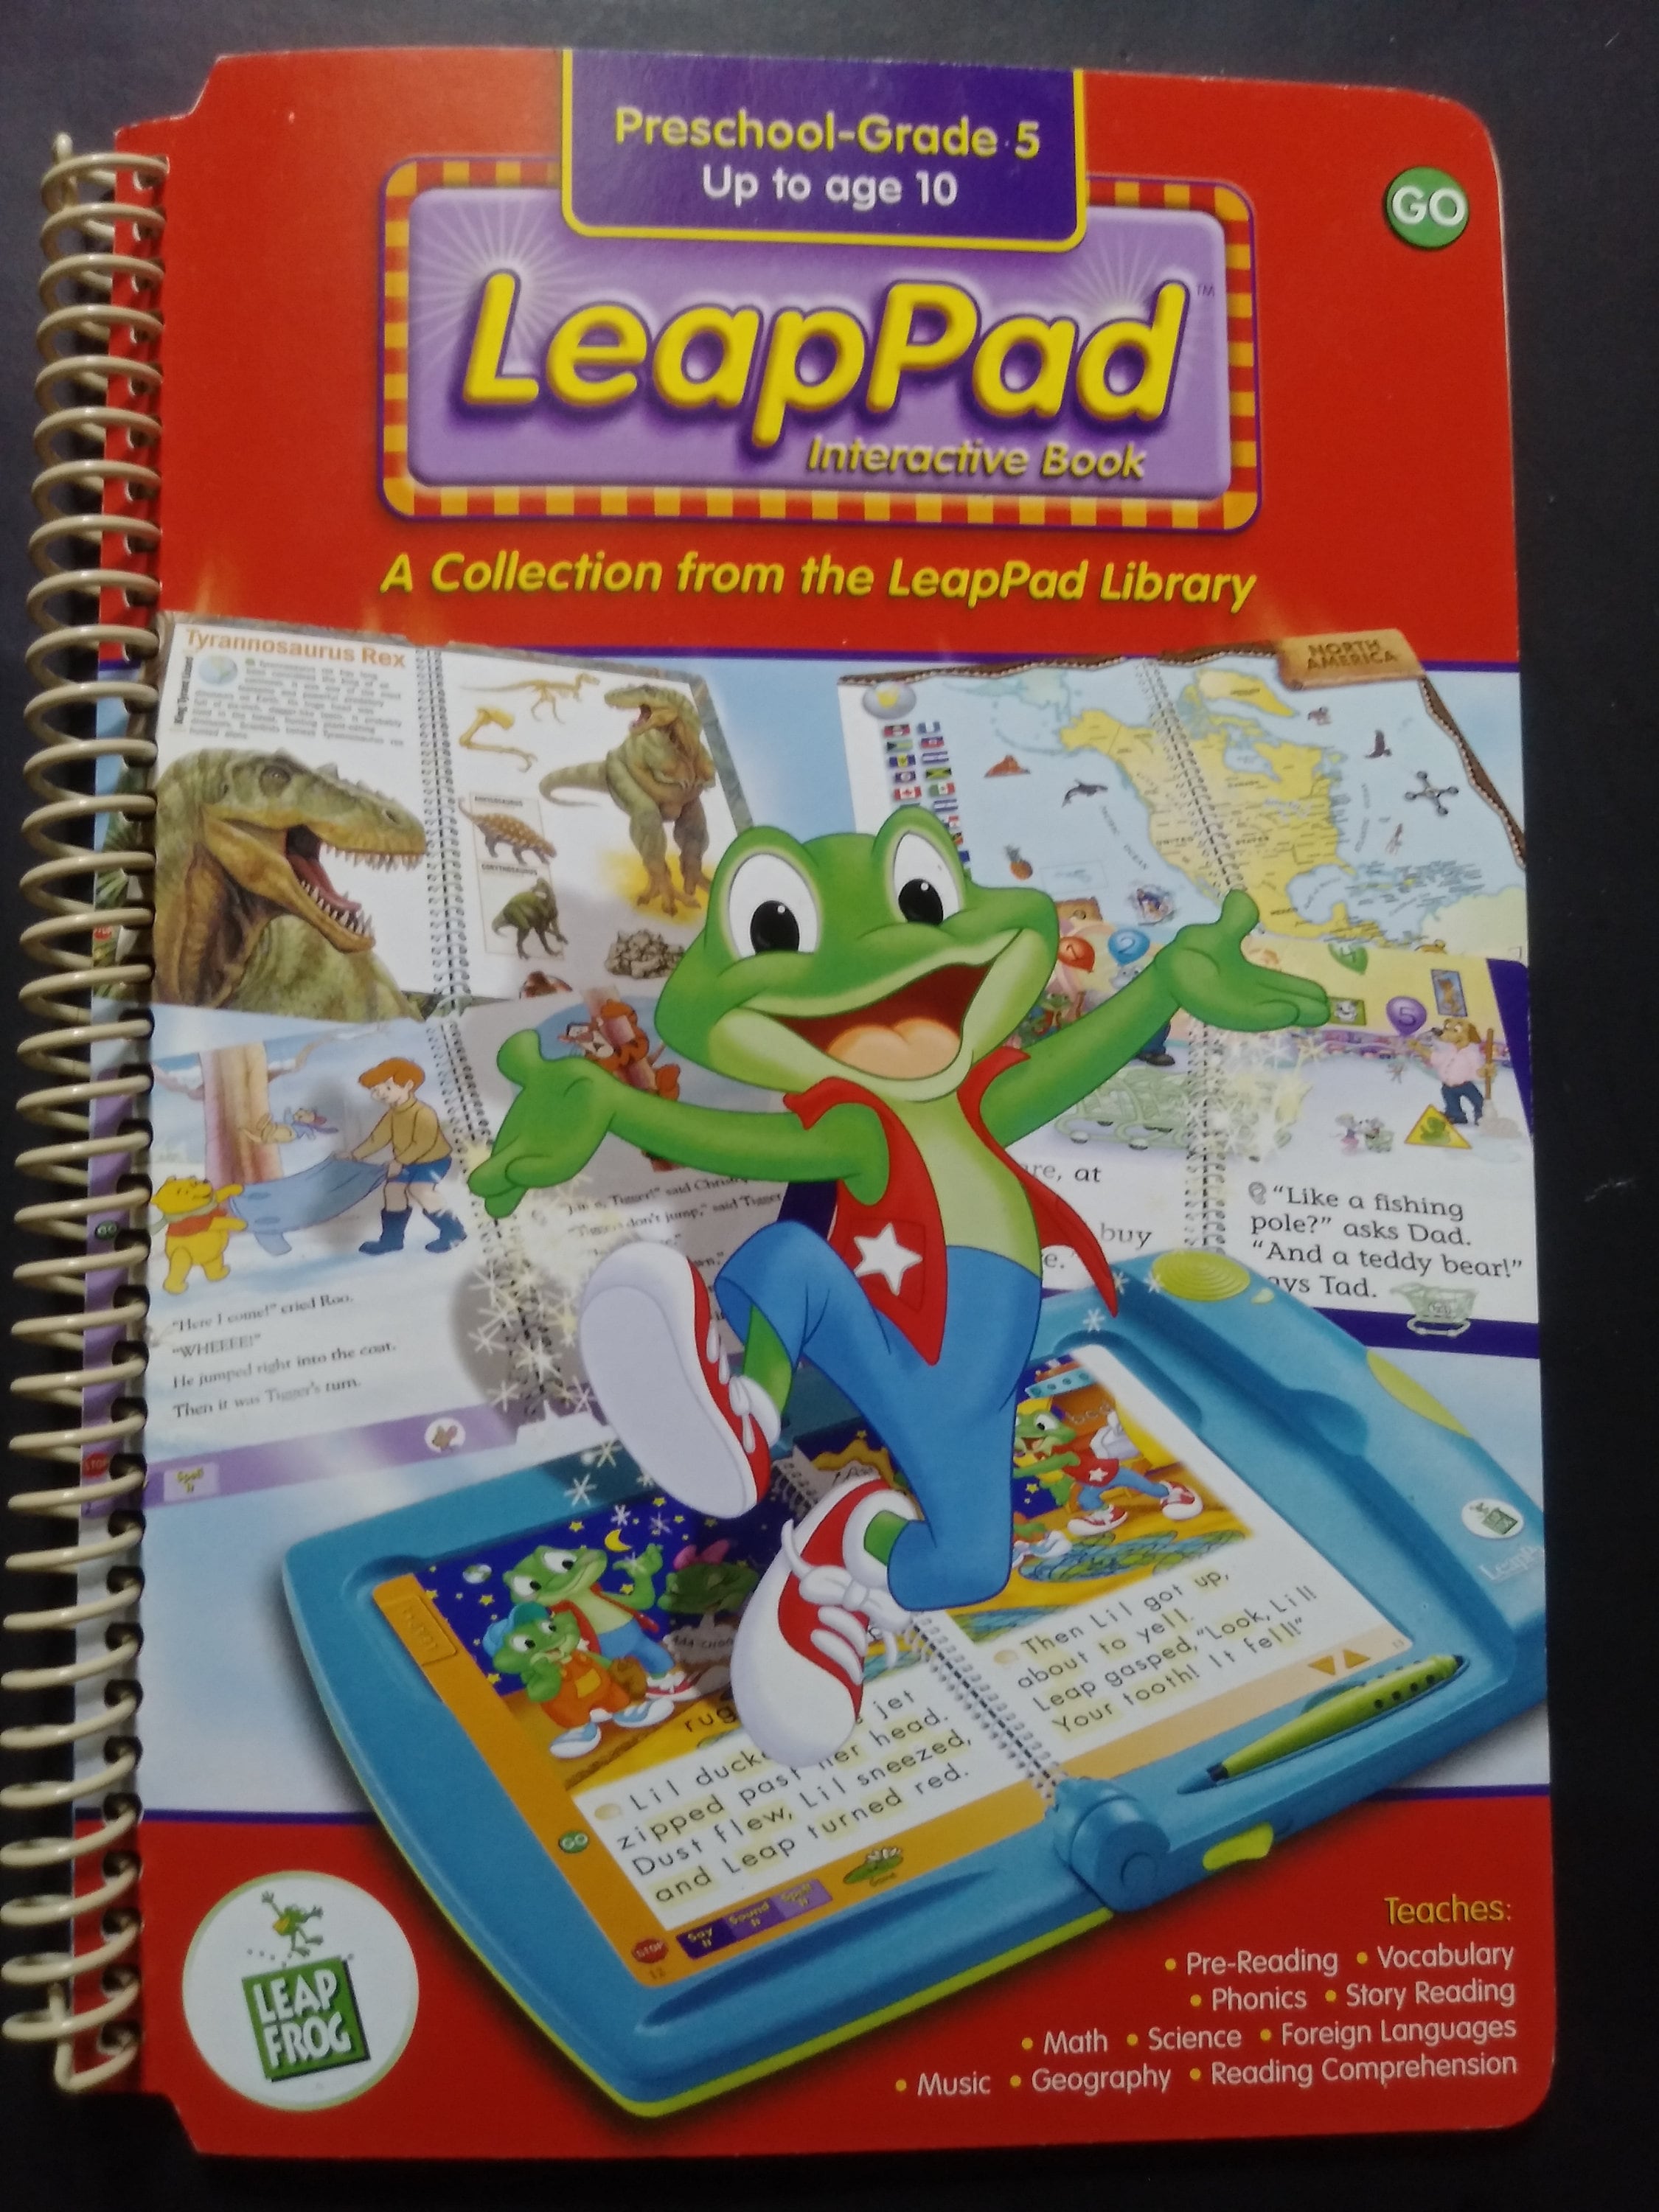 Leapfrog Leappad A Collection From the Leappad Library Book | Etsy